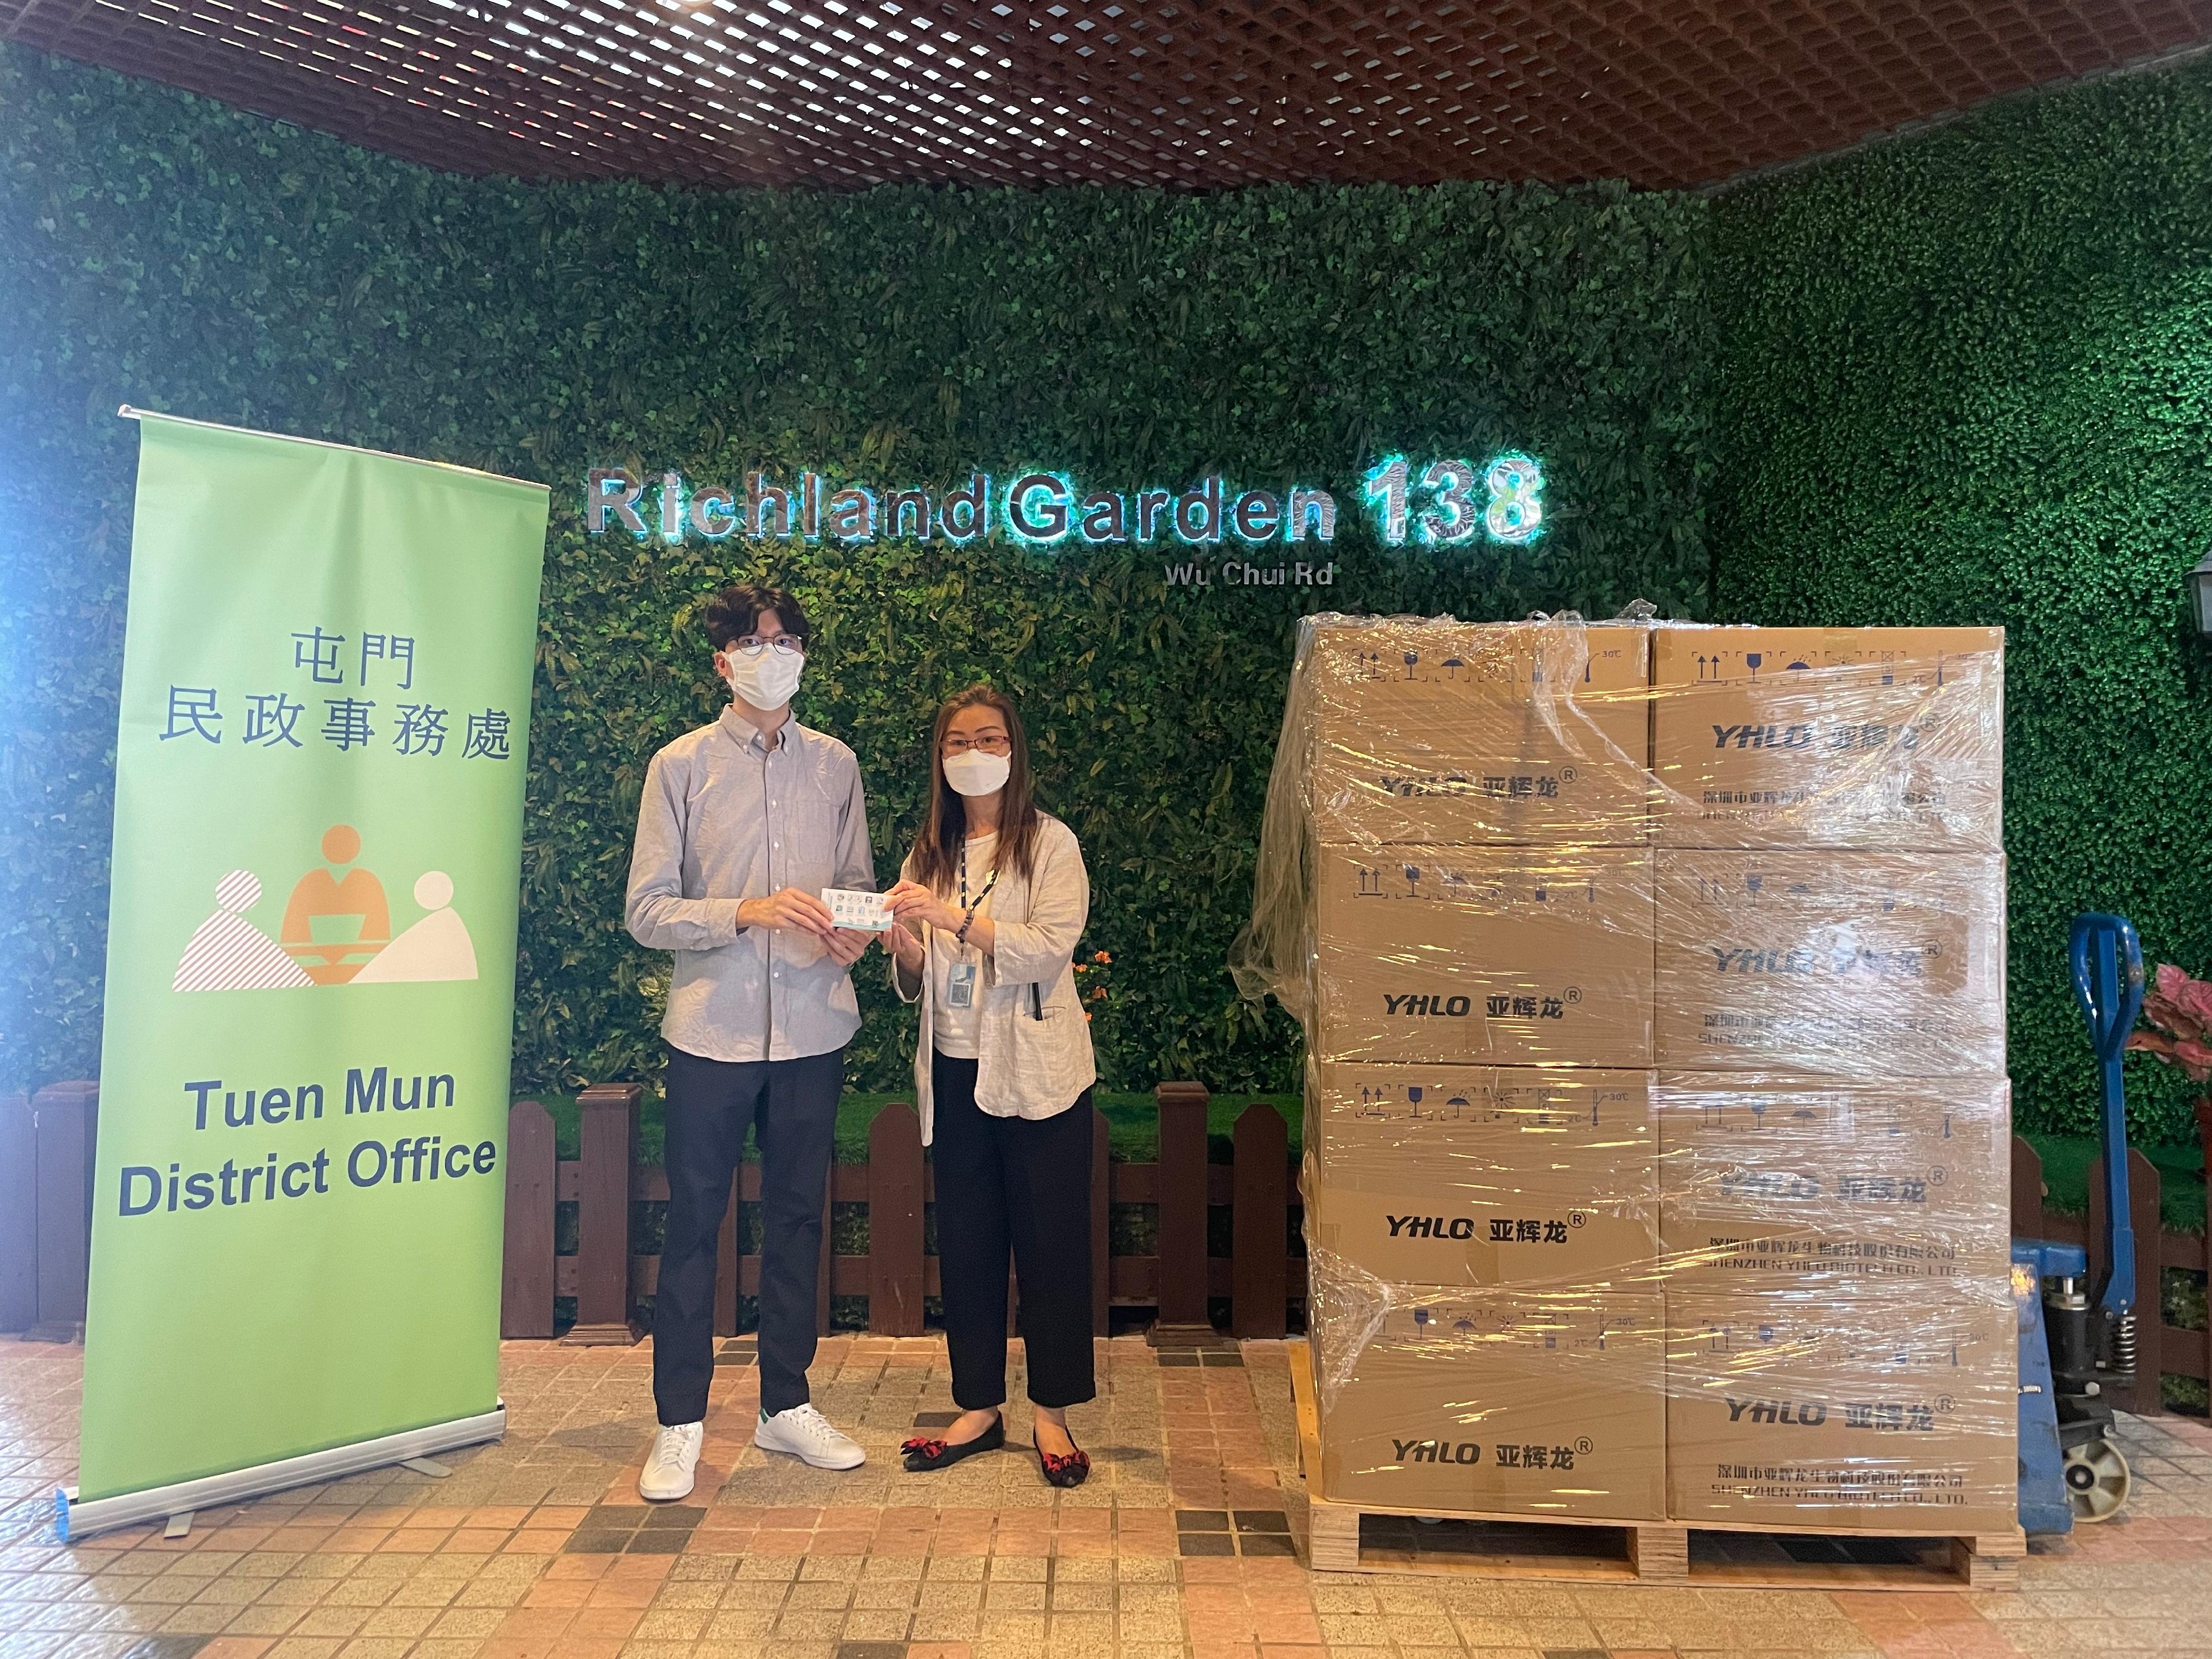 The Tuen Mun District Office today (April 24) distributed COVID-19 rapid test kits to households, cleansing workers and property management staff living and working in Richland Garden for voluntary testing through the property management company.